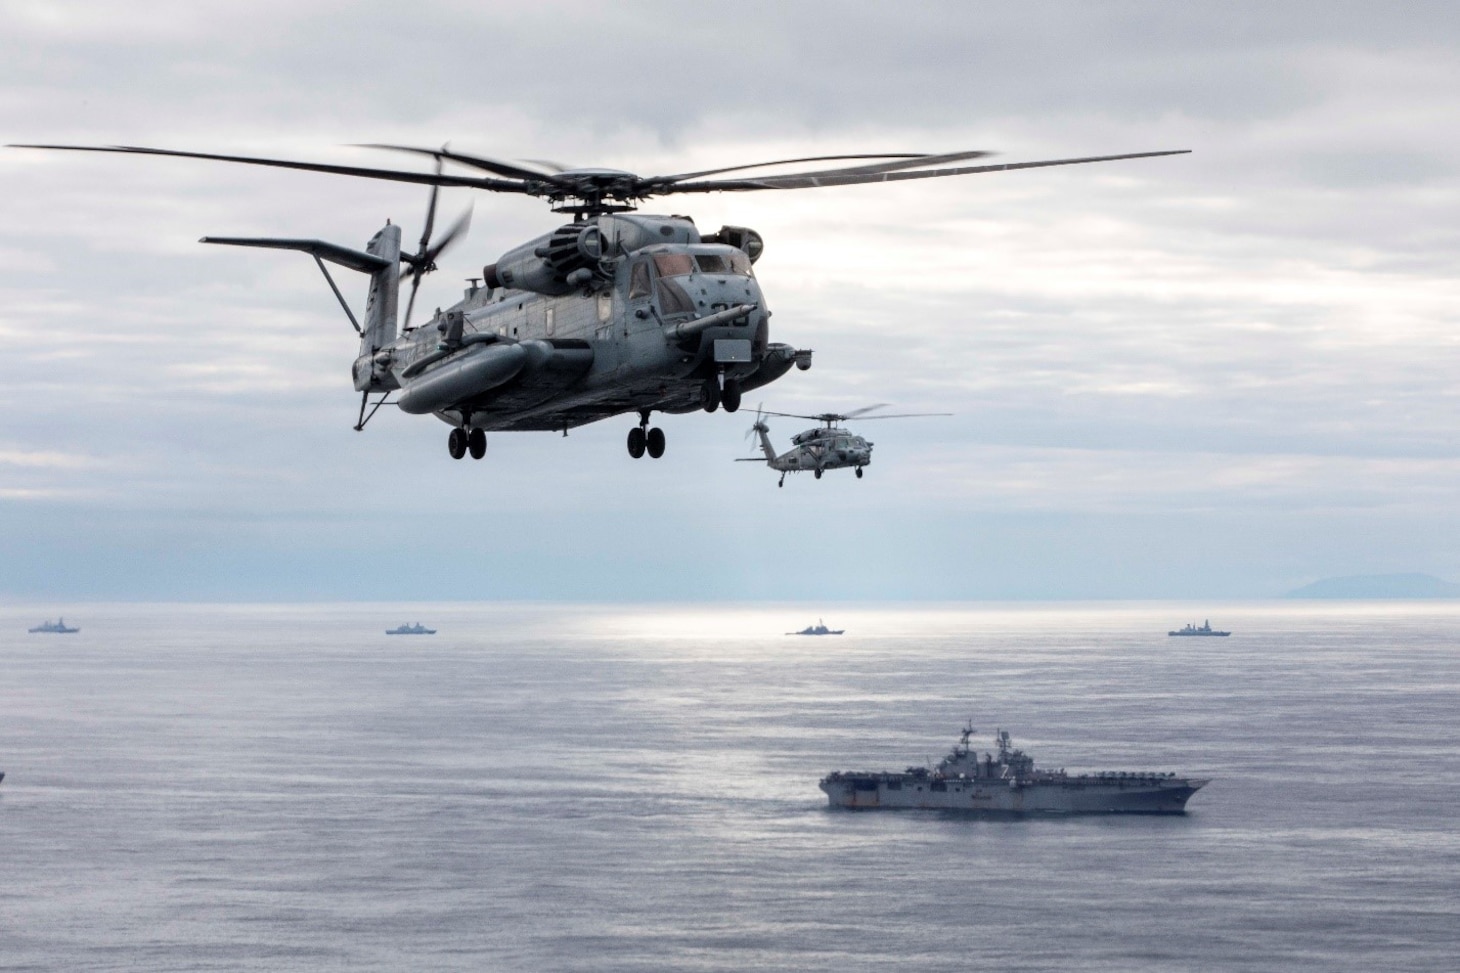 A CH-53 Stallion helicopter, left, attached to Marine Medium Tiltrotor Squadron (VMM) 162 (Reinforced) and an MH-60S Sea Hawk helicopter from the “Chargers” of Helicopter Sea Combat Squadron (HSC) 26 fly alongside the Wasp-class amphibious assault ship USS Iwo Jima (LHD 7) during a photo exercise, May 17, 2021. Iwo Jima is underway in the Atlantic Ocean with Amphibious Squadron 4 and the 24th Marine Expeditionary Unit (MEU) as part of the Iwo Jima Amphibious Ready Group.